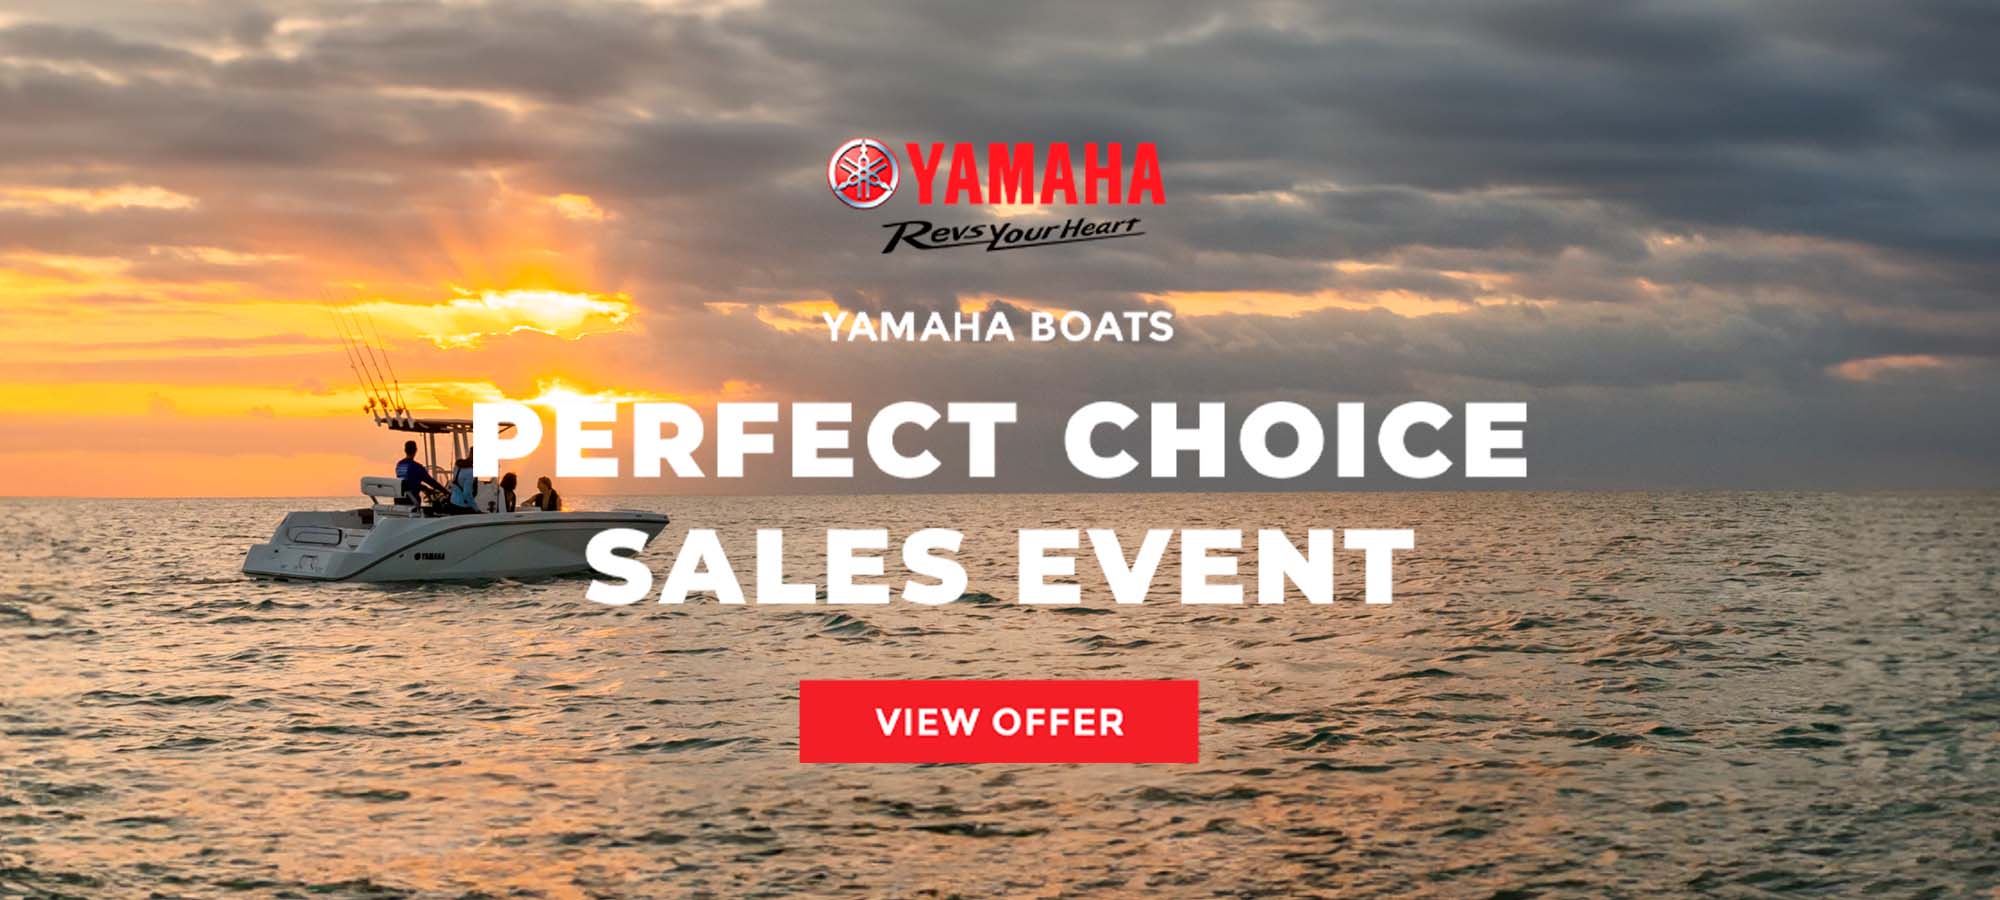 Yamaha US - Boats - PERFECT CHOICE SALES EVENT at Wood Powersports Fayetteville